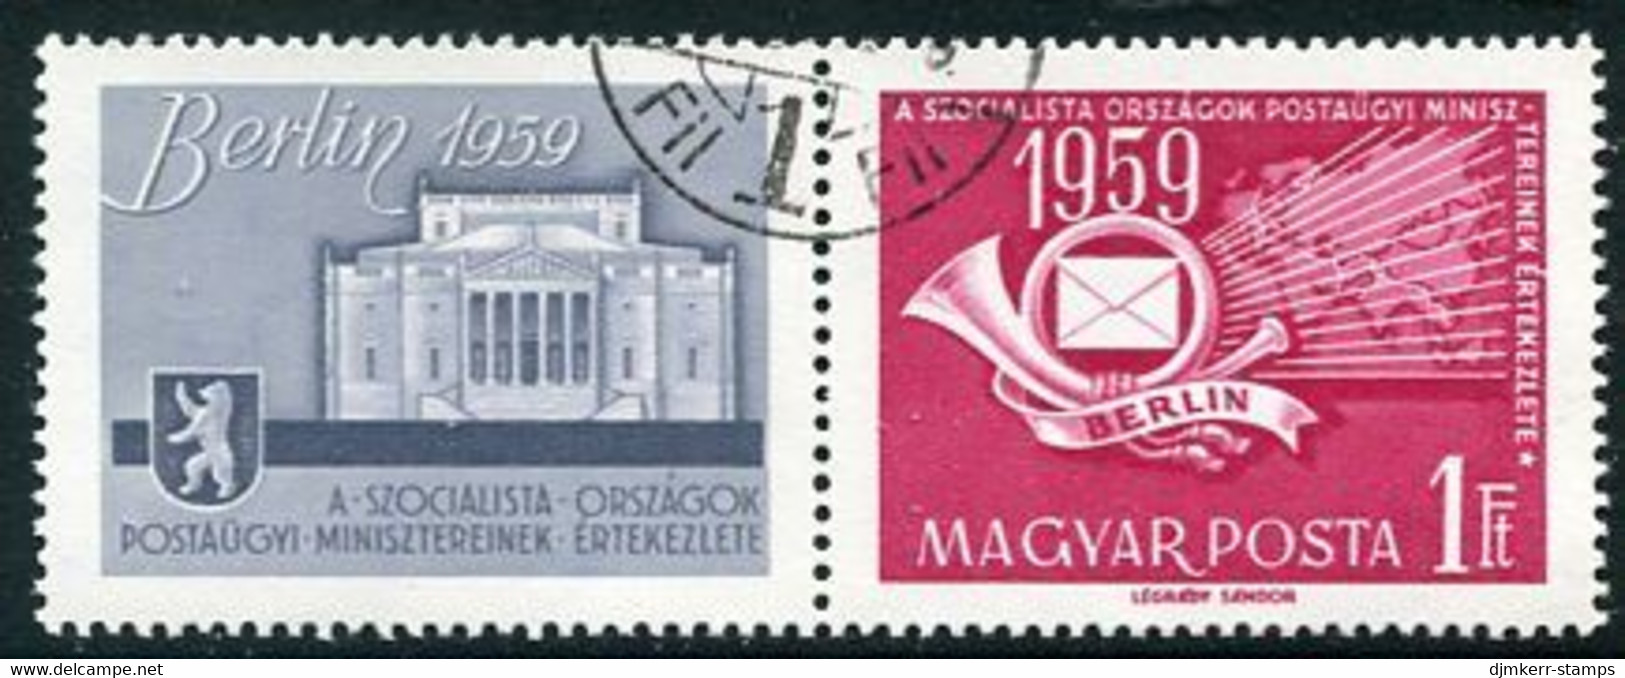 HUNGARY 1959 Socialist Minister's Postal Conference   Used.  Michel 1592 - Gebruikt